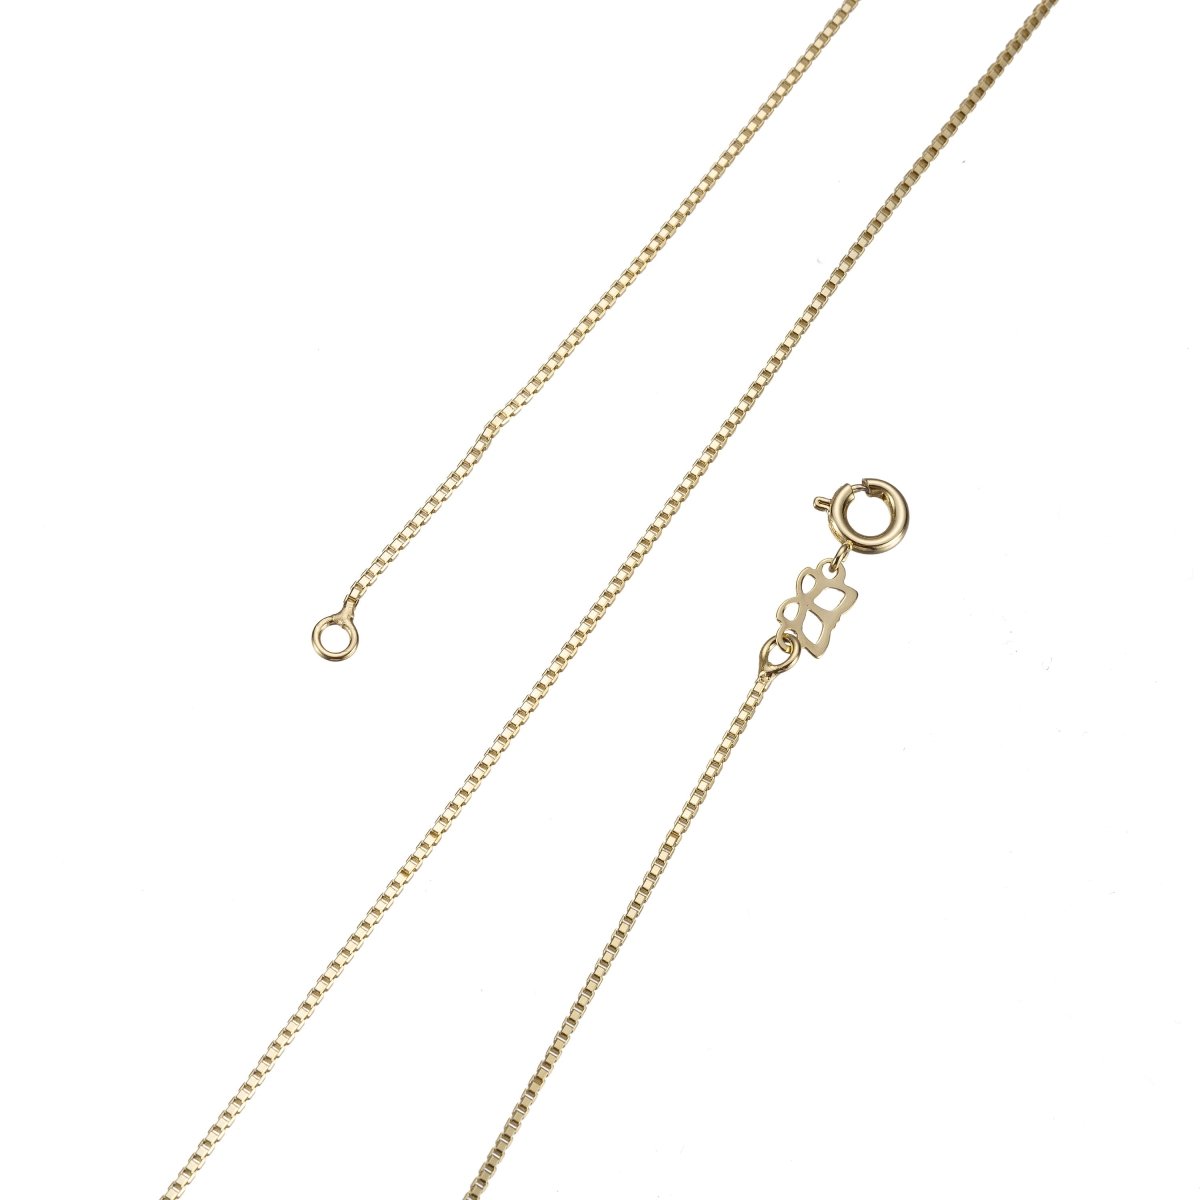 15.5 Inches Rolo Chain Necklace, Dainty 1mm Rolo, 24K Gold Plated Rolo Chain Necklace w/Spring Ring | CN-236 - DLUXCA